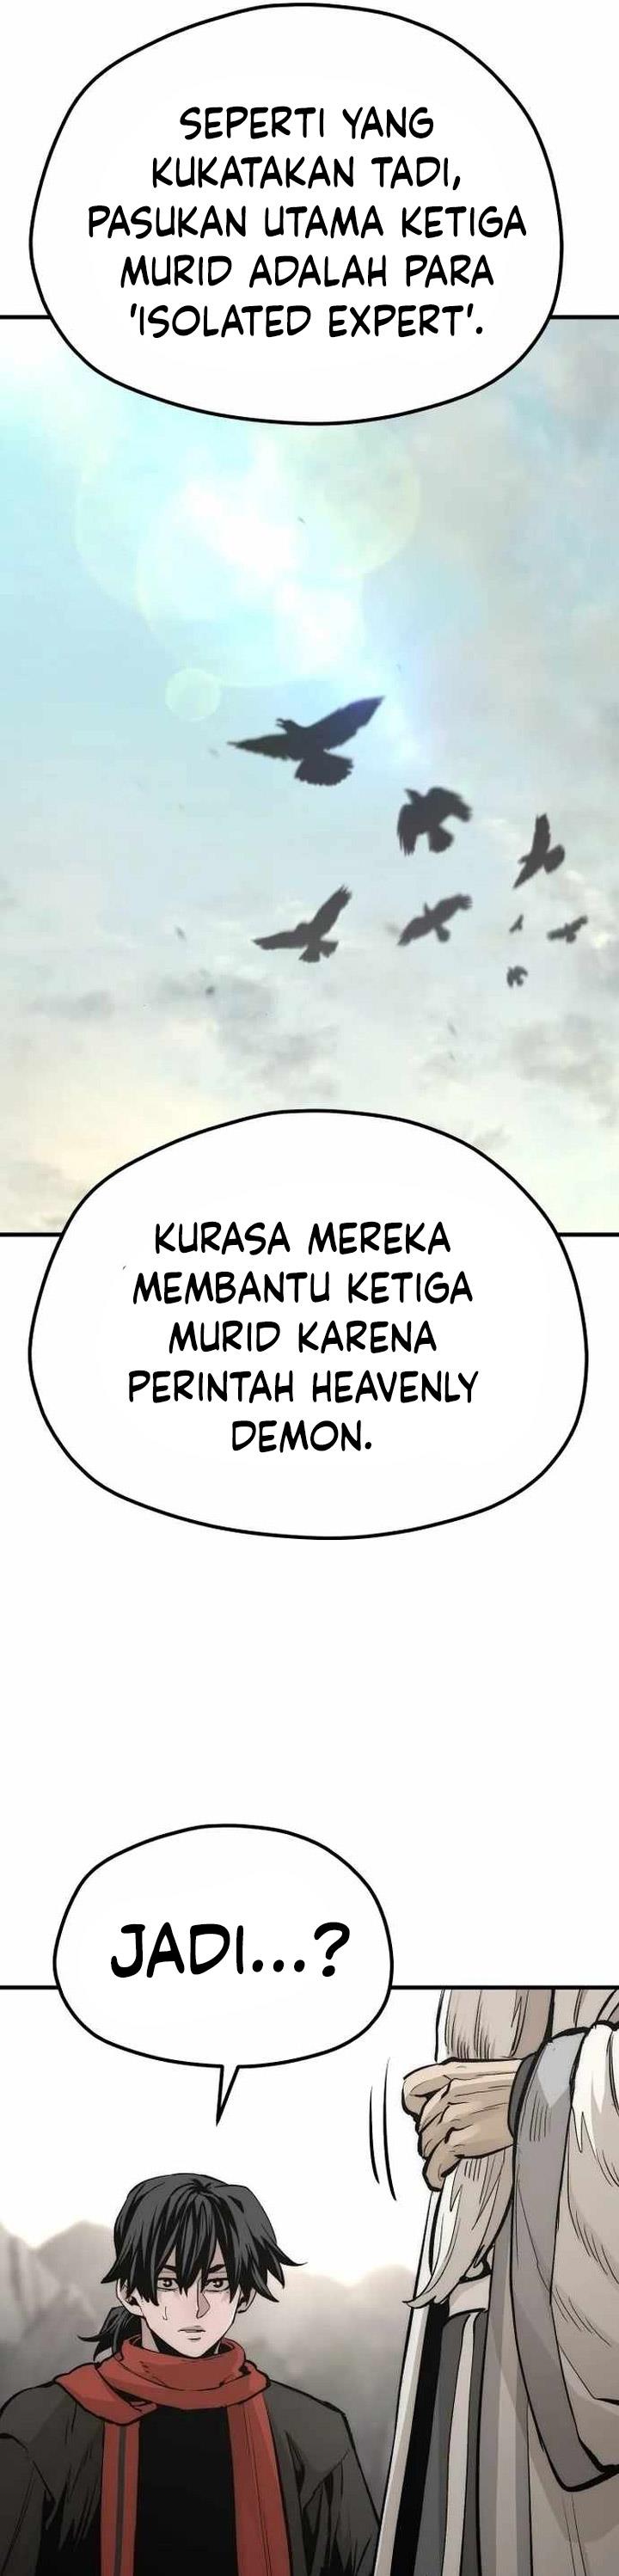 Heavenly Demon Cultivation Simulation Chapter 112